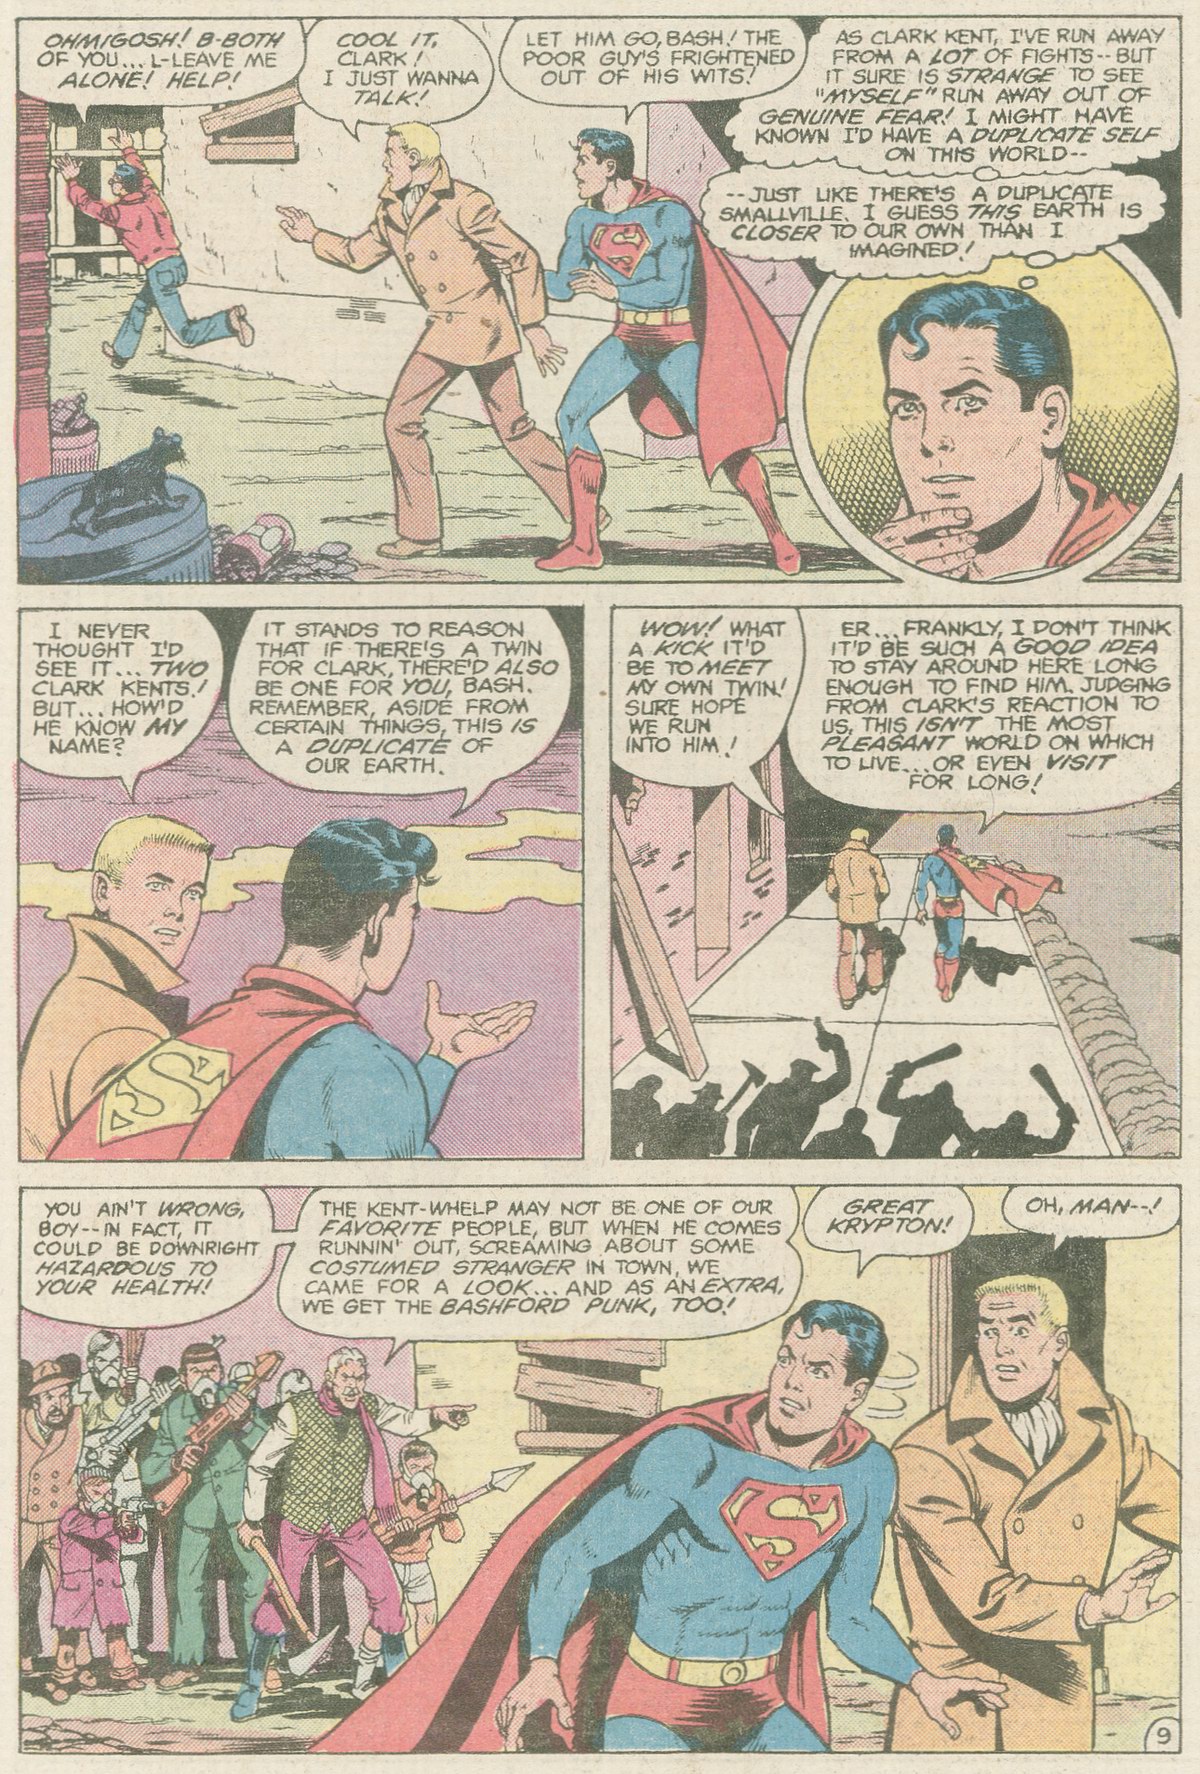 The New Adventures of Superboy 39 Page 9